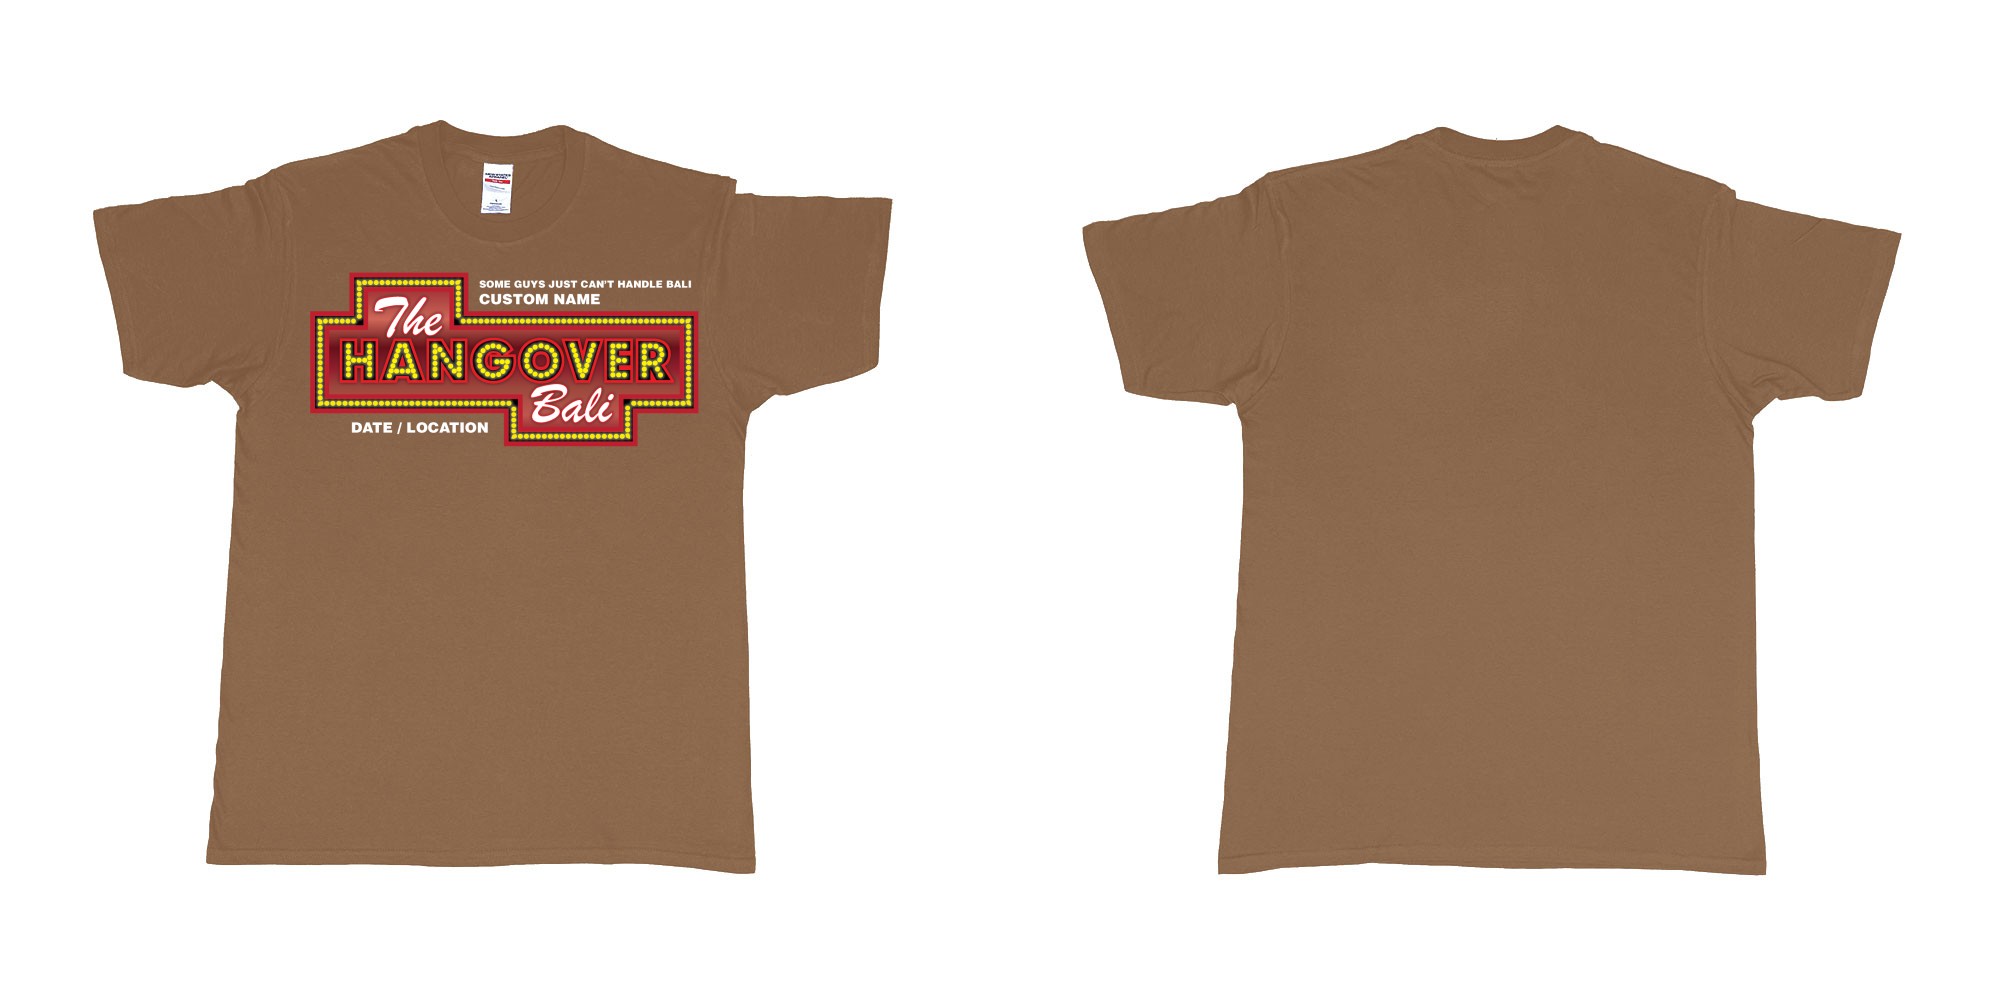 Custom tshirt design the hangover bali tour custom printing own name in fabric color chestnut choice your own text made in Bali by The Pirate Way